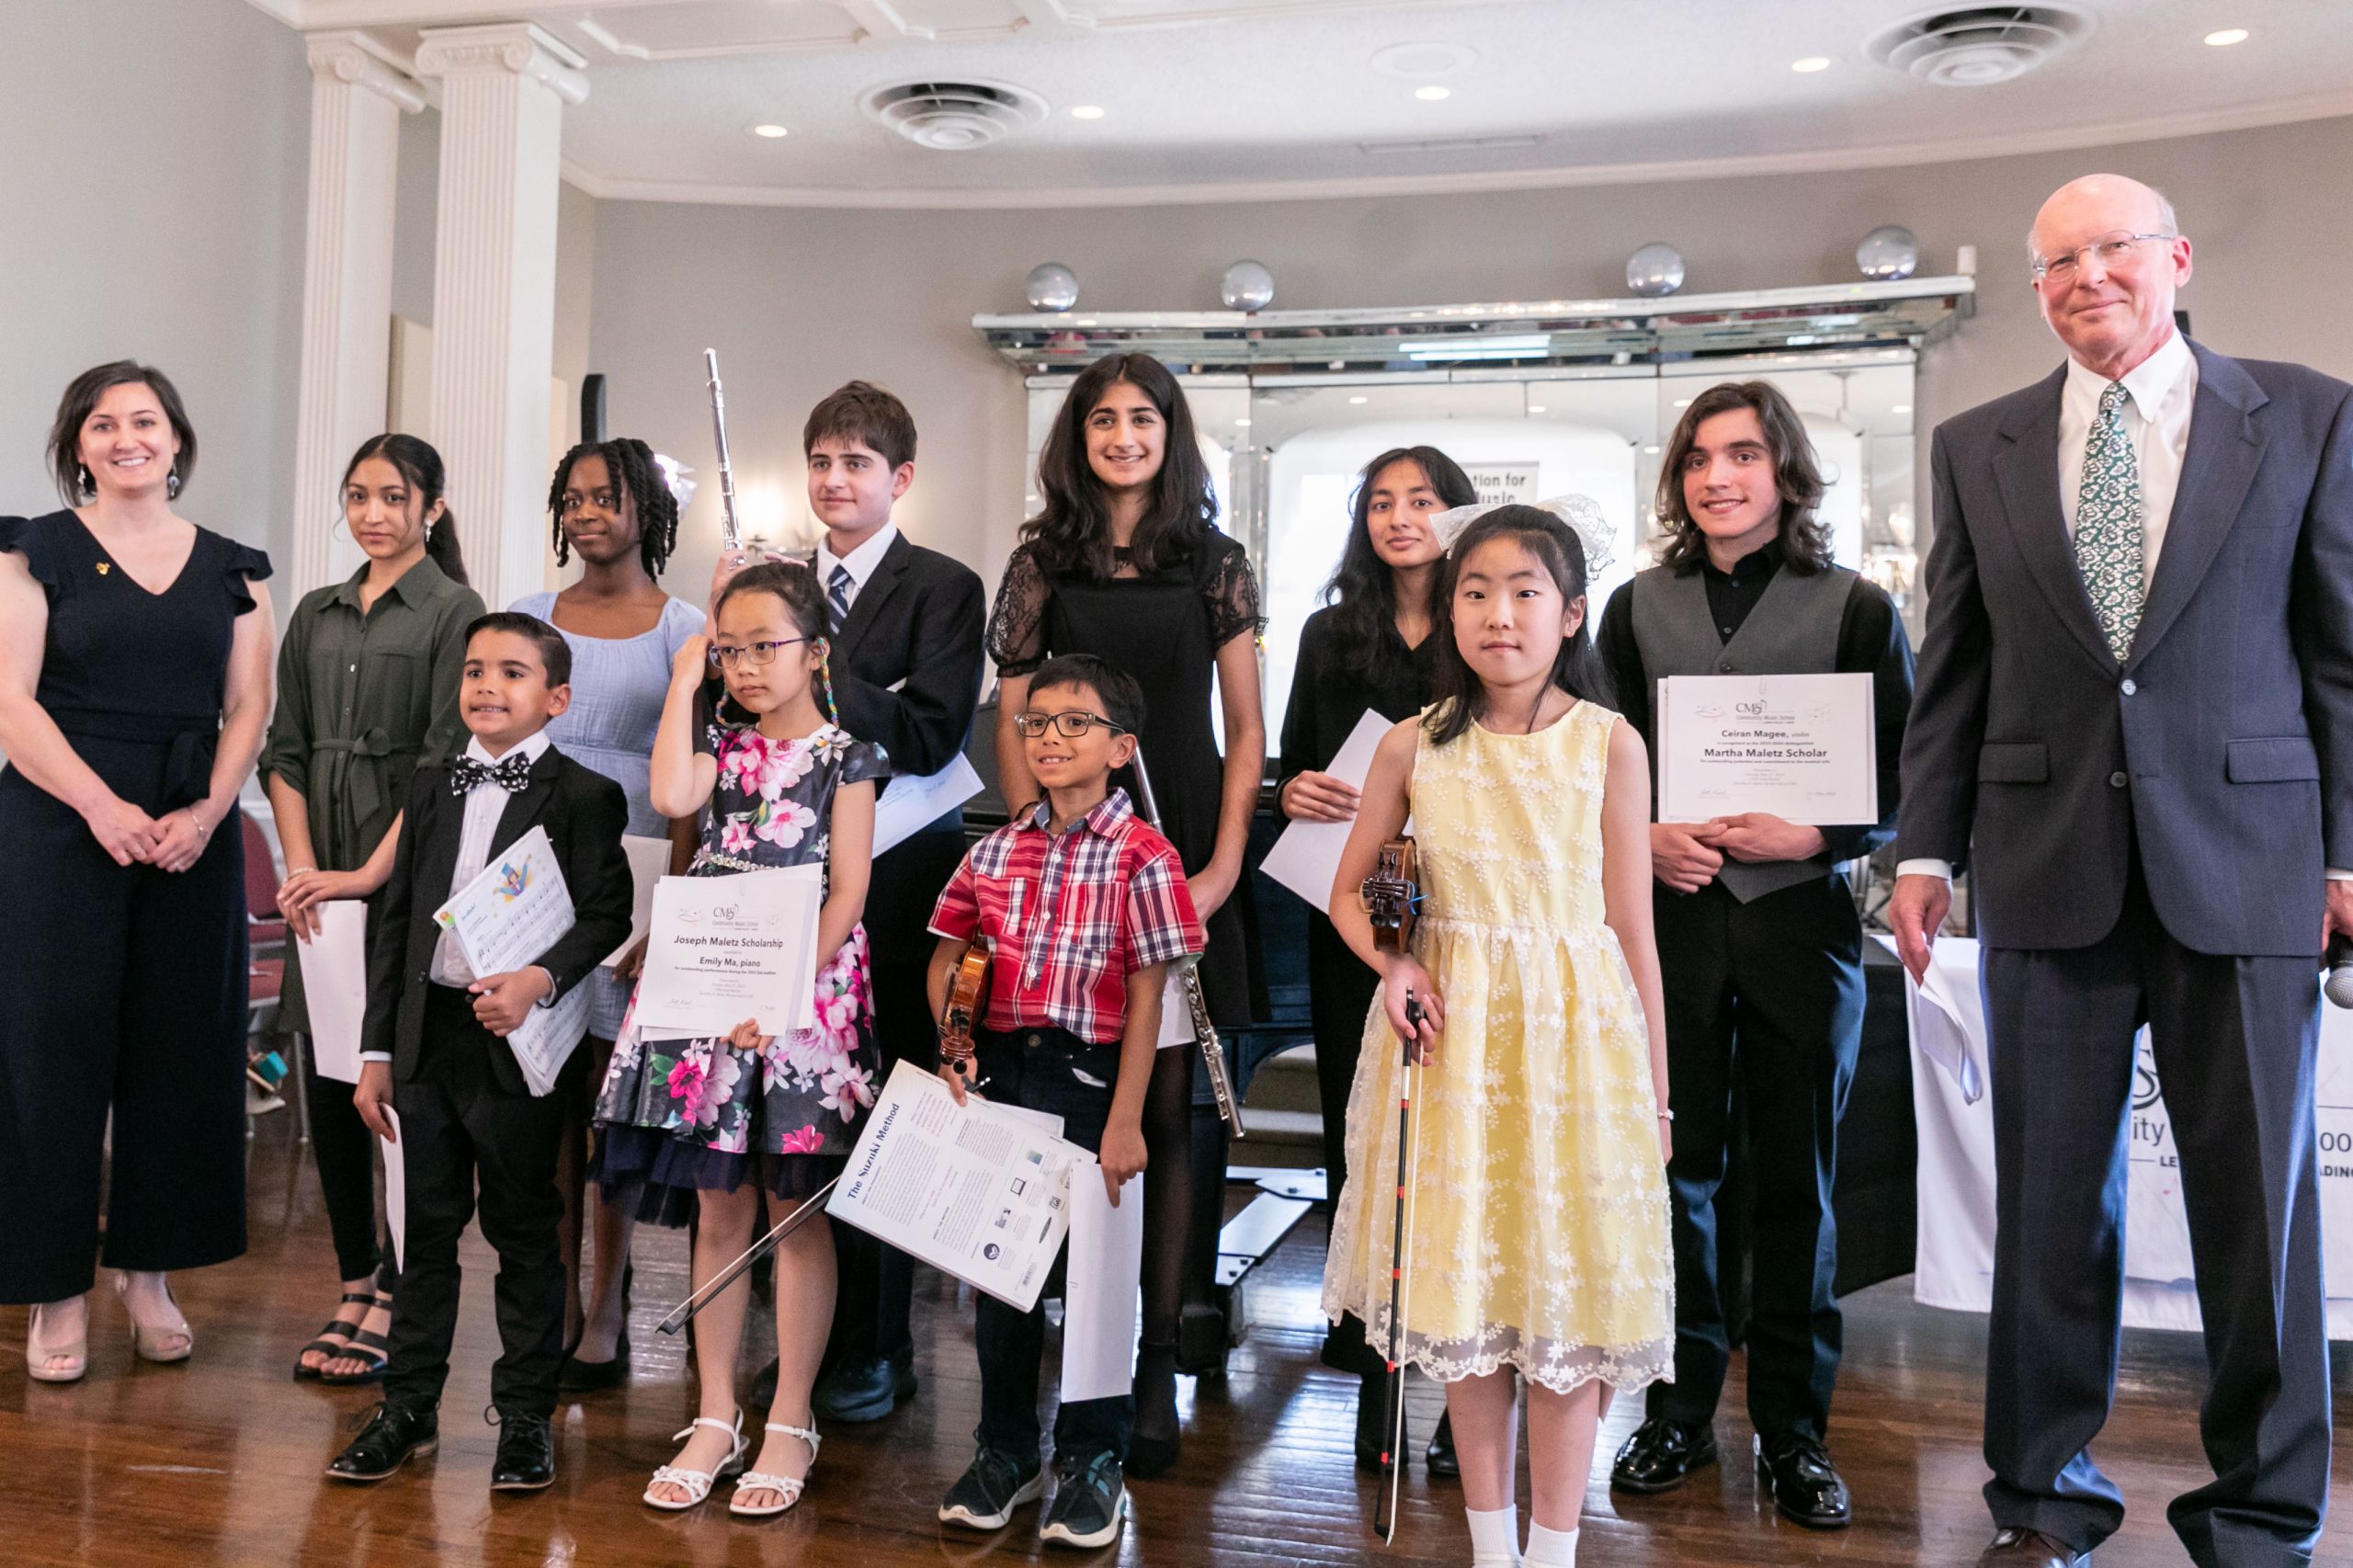 On Sunday, May 21, 2023, Community Music School (CMS) held the annual Gala Recital & Scholarship Awards in the Dorothy H. Baker Recital Hall at CMS. Pictured are CMS Executive Director Jeff Reed (far right) and CMS Assistant Director Lisa Kulp (far left) with the 2023 Gala Scholarship recipients: (front l-r) Sebastian Santiago, Emily Ma, Siddharth Chitta, Rene Kim, (back l-r) Maanya Gope, Harmony John, Isaac Sharma, Aanya Sharma, Shriya Chitta, and Ceiran Magee.